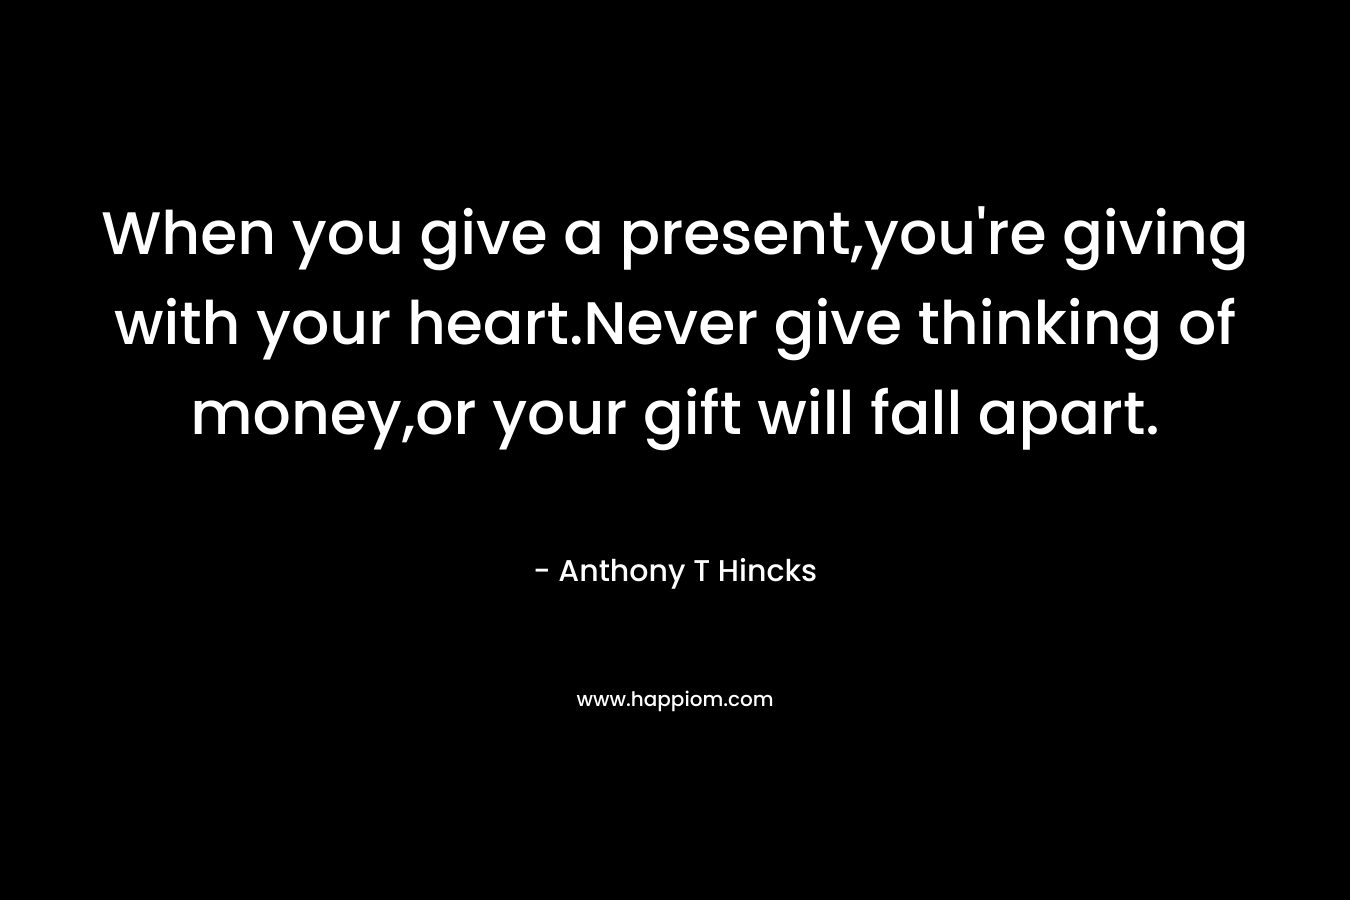 When you give a present,you're giving with your heart.Never give thinking of money,or your gift will fall apart.